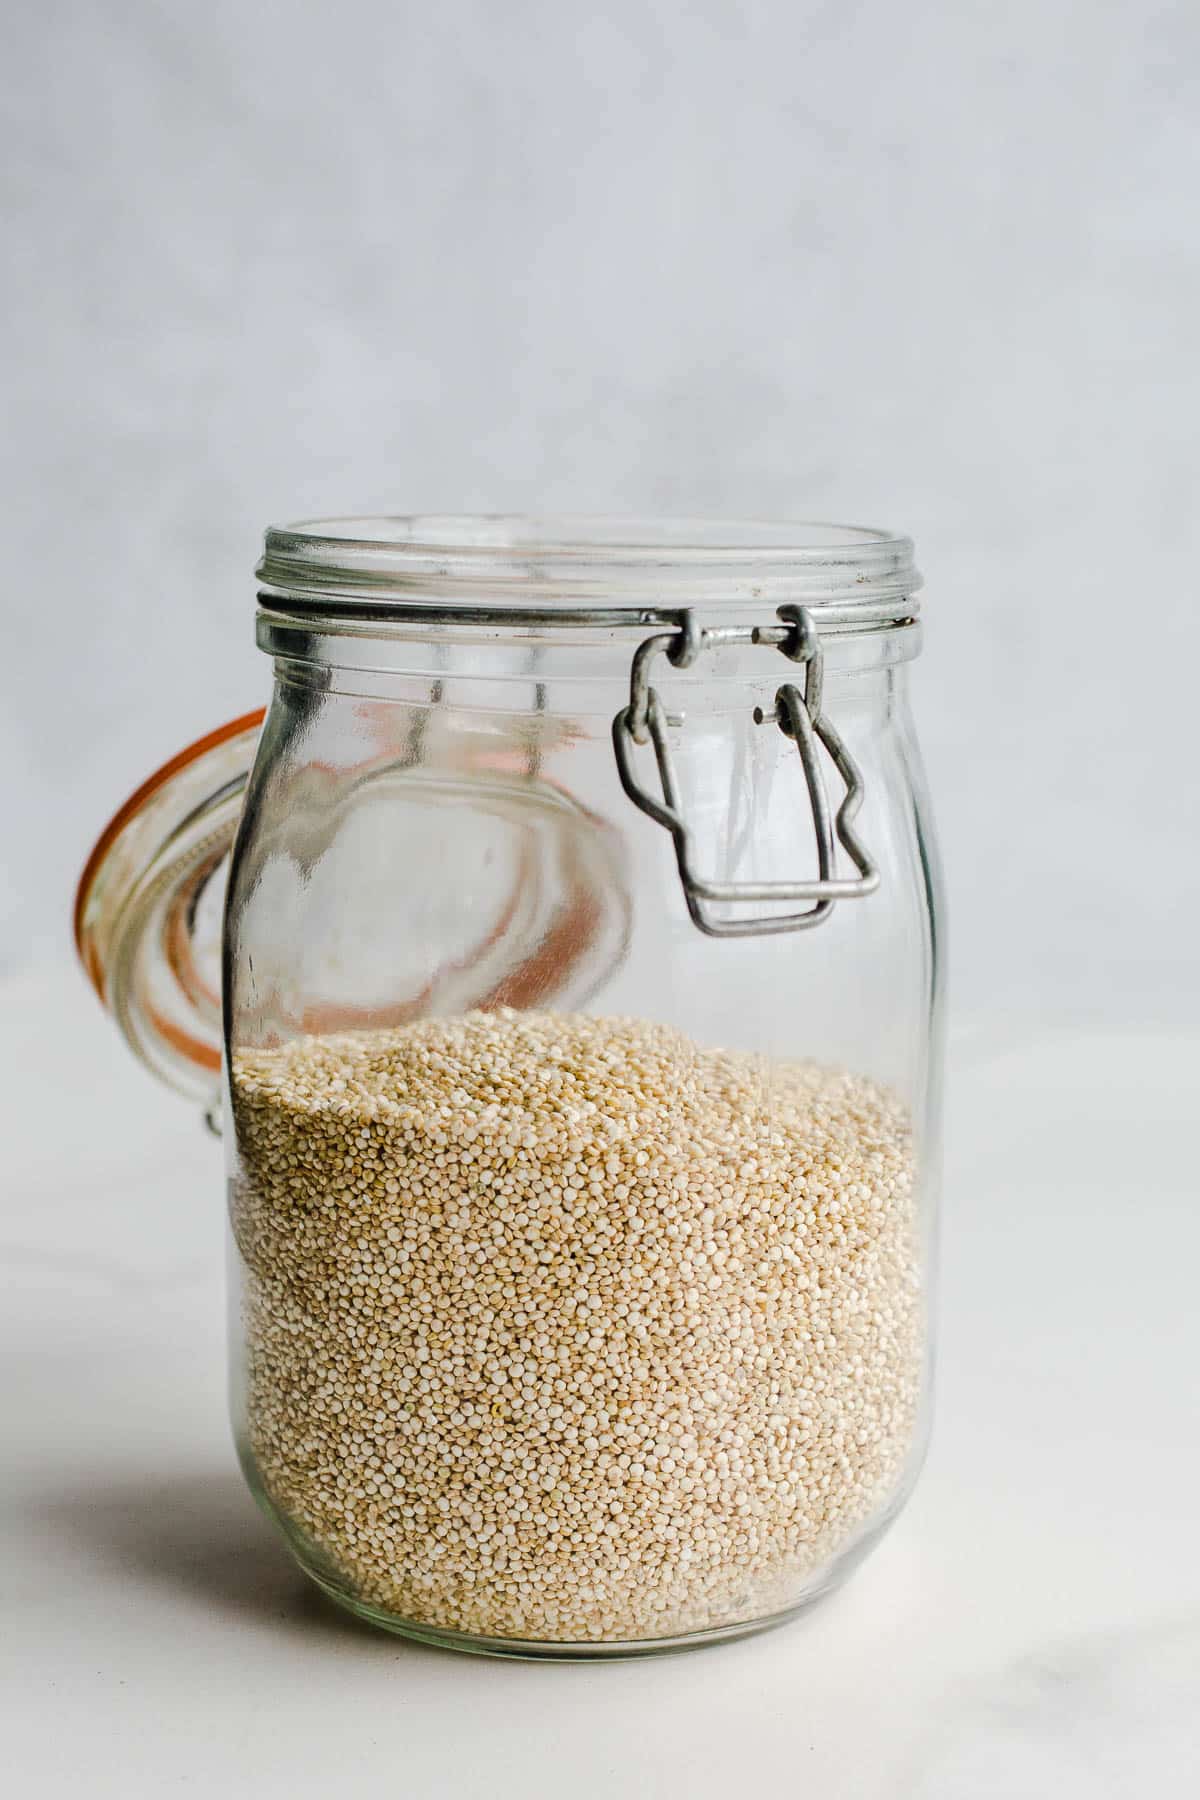 A glass jar with a lid with seeds inside.